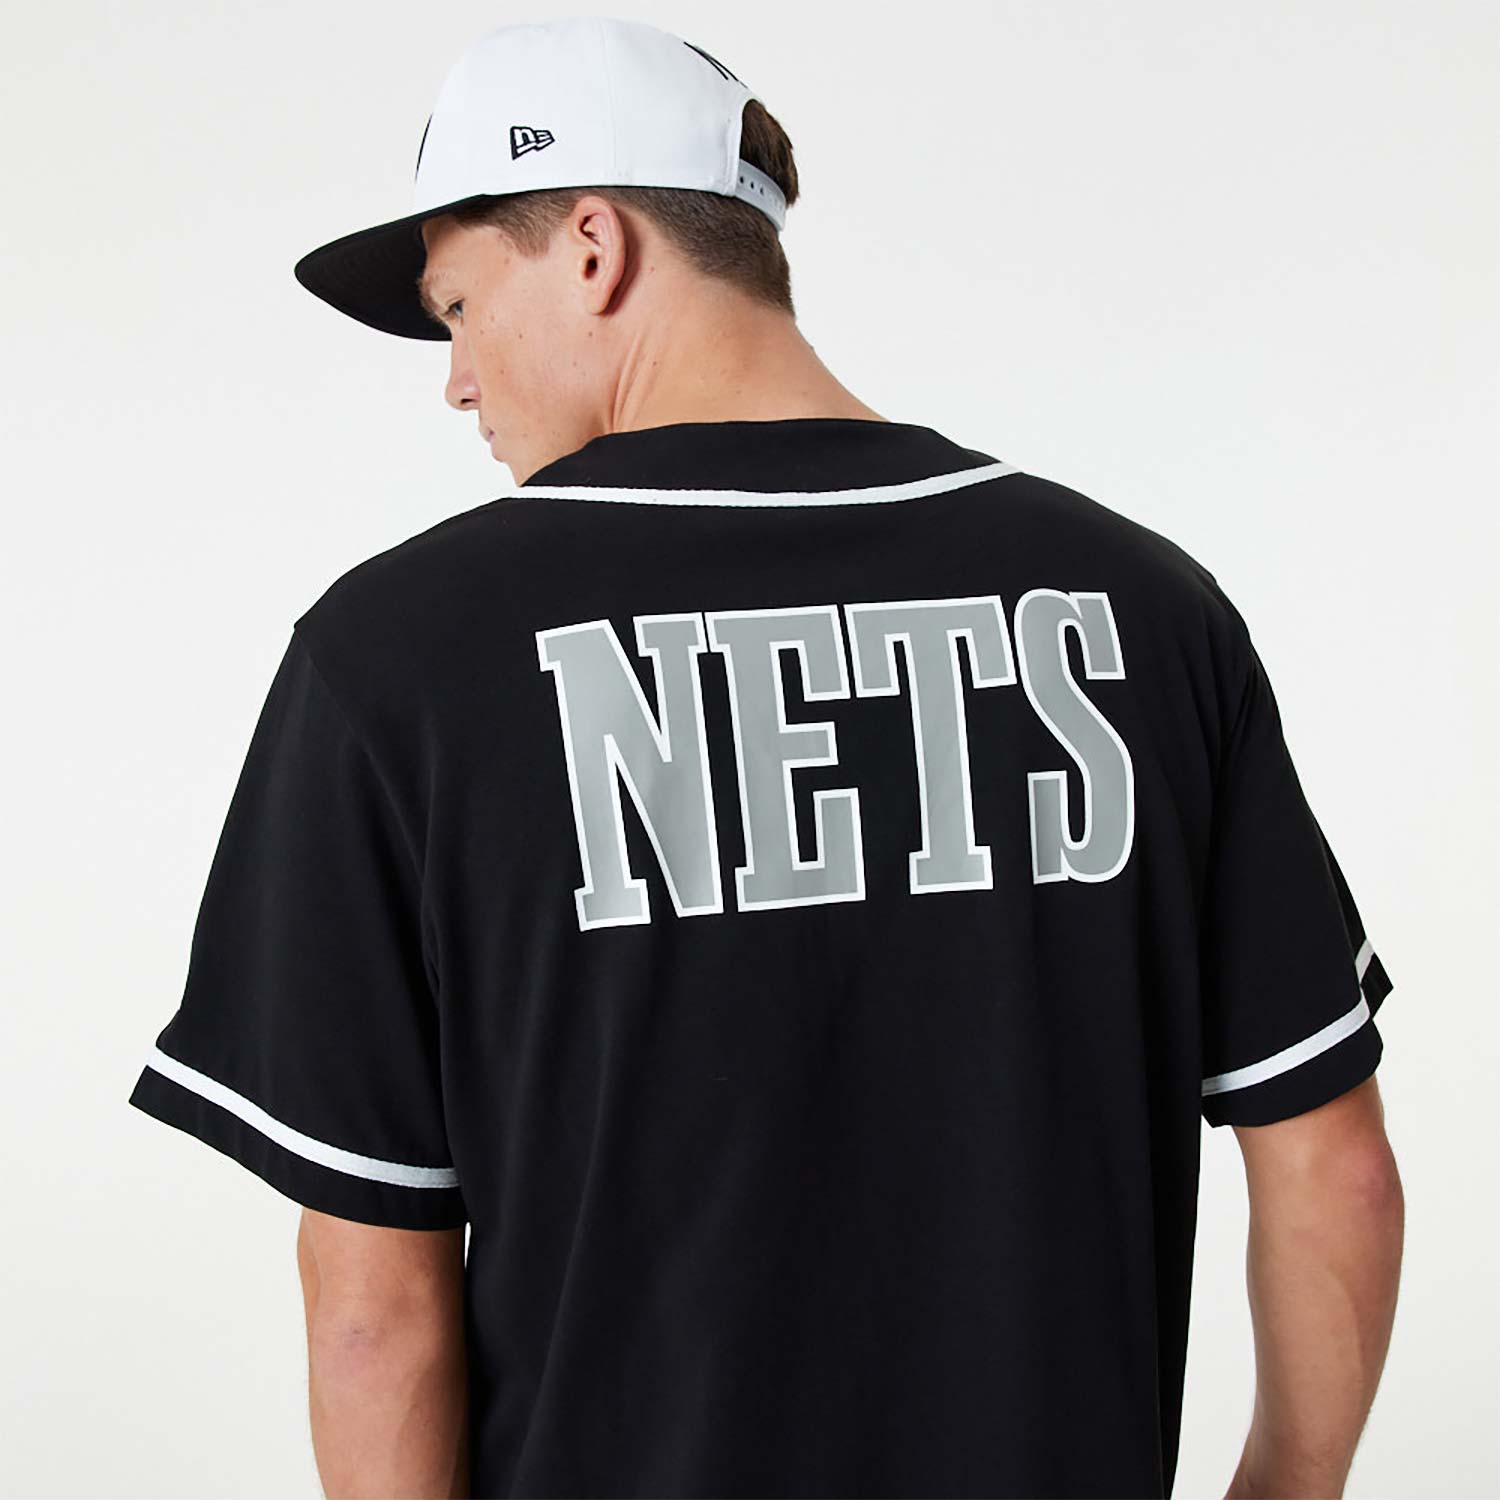 black and white mets jersey